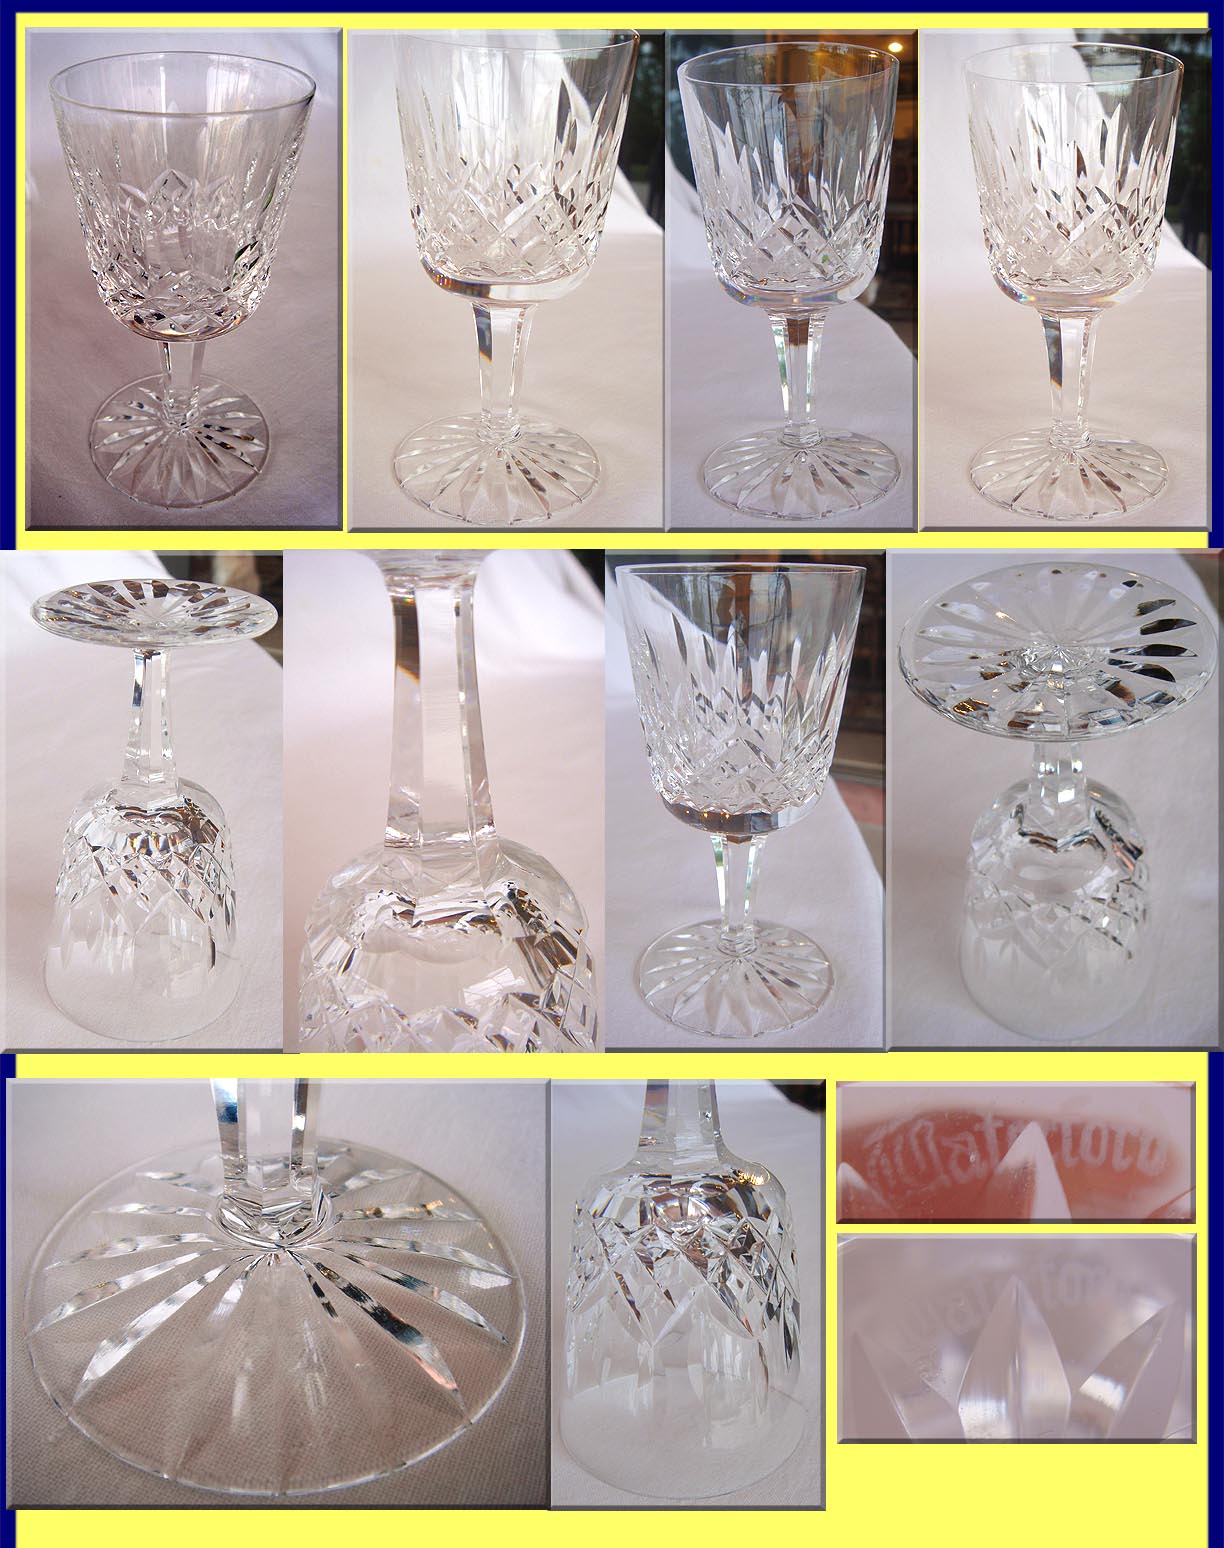 Waterford vintage set 13 signed cut glass  sherry wine glasses (4245)